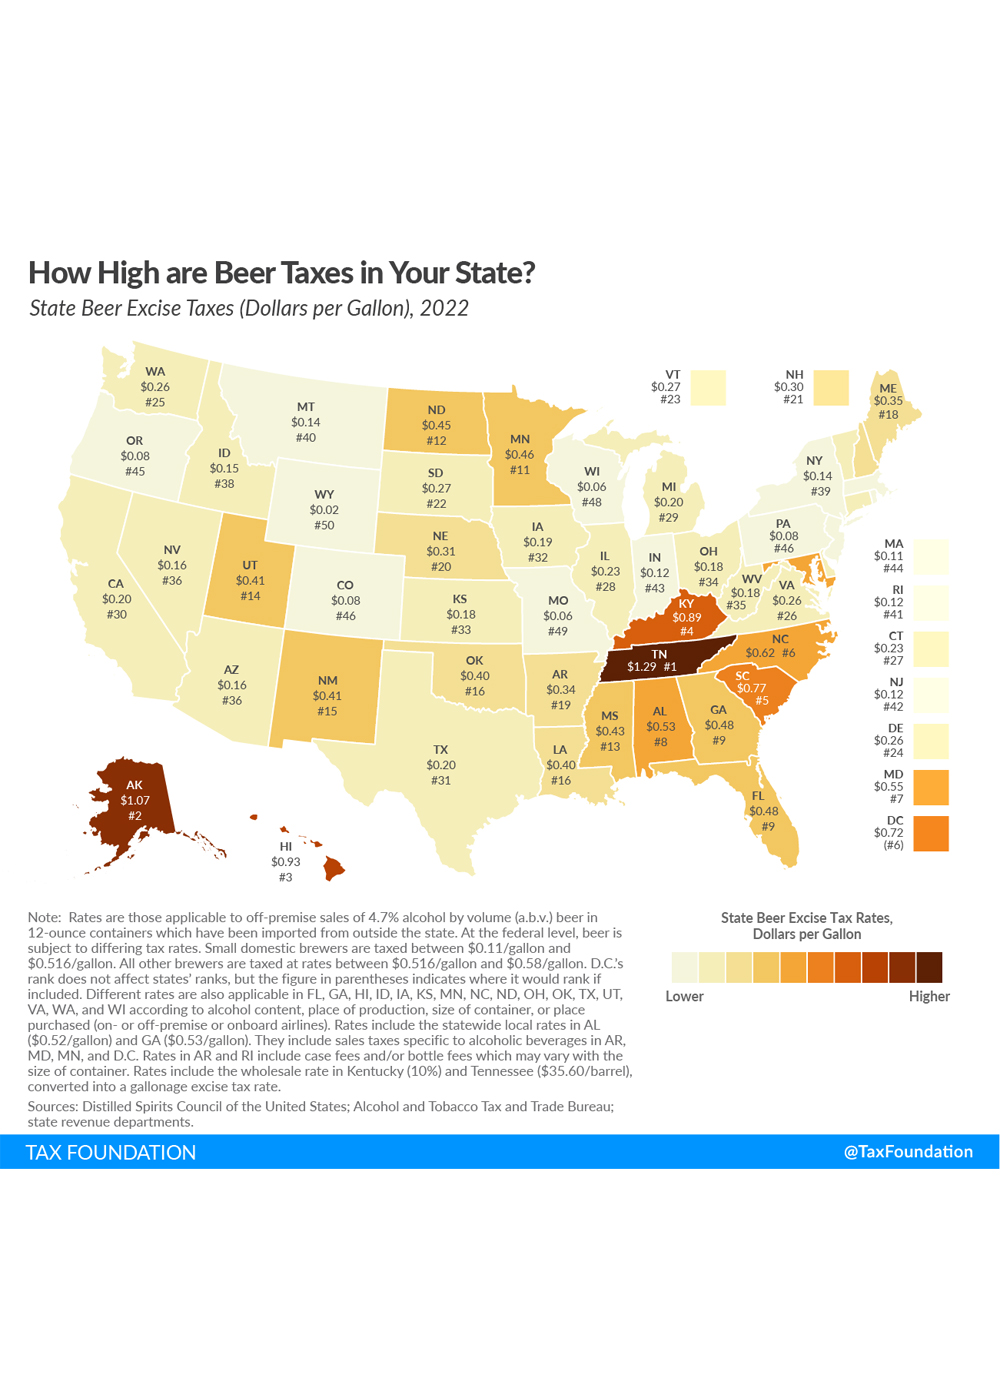 These are the states with the highest excise taxes